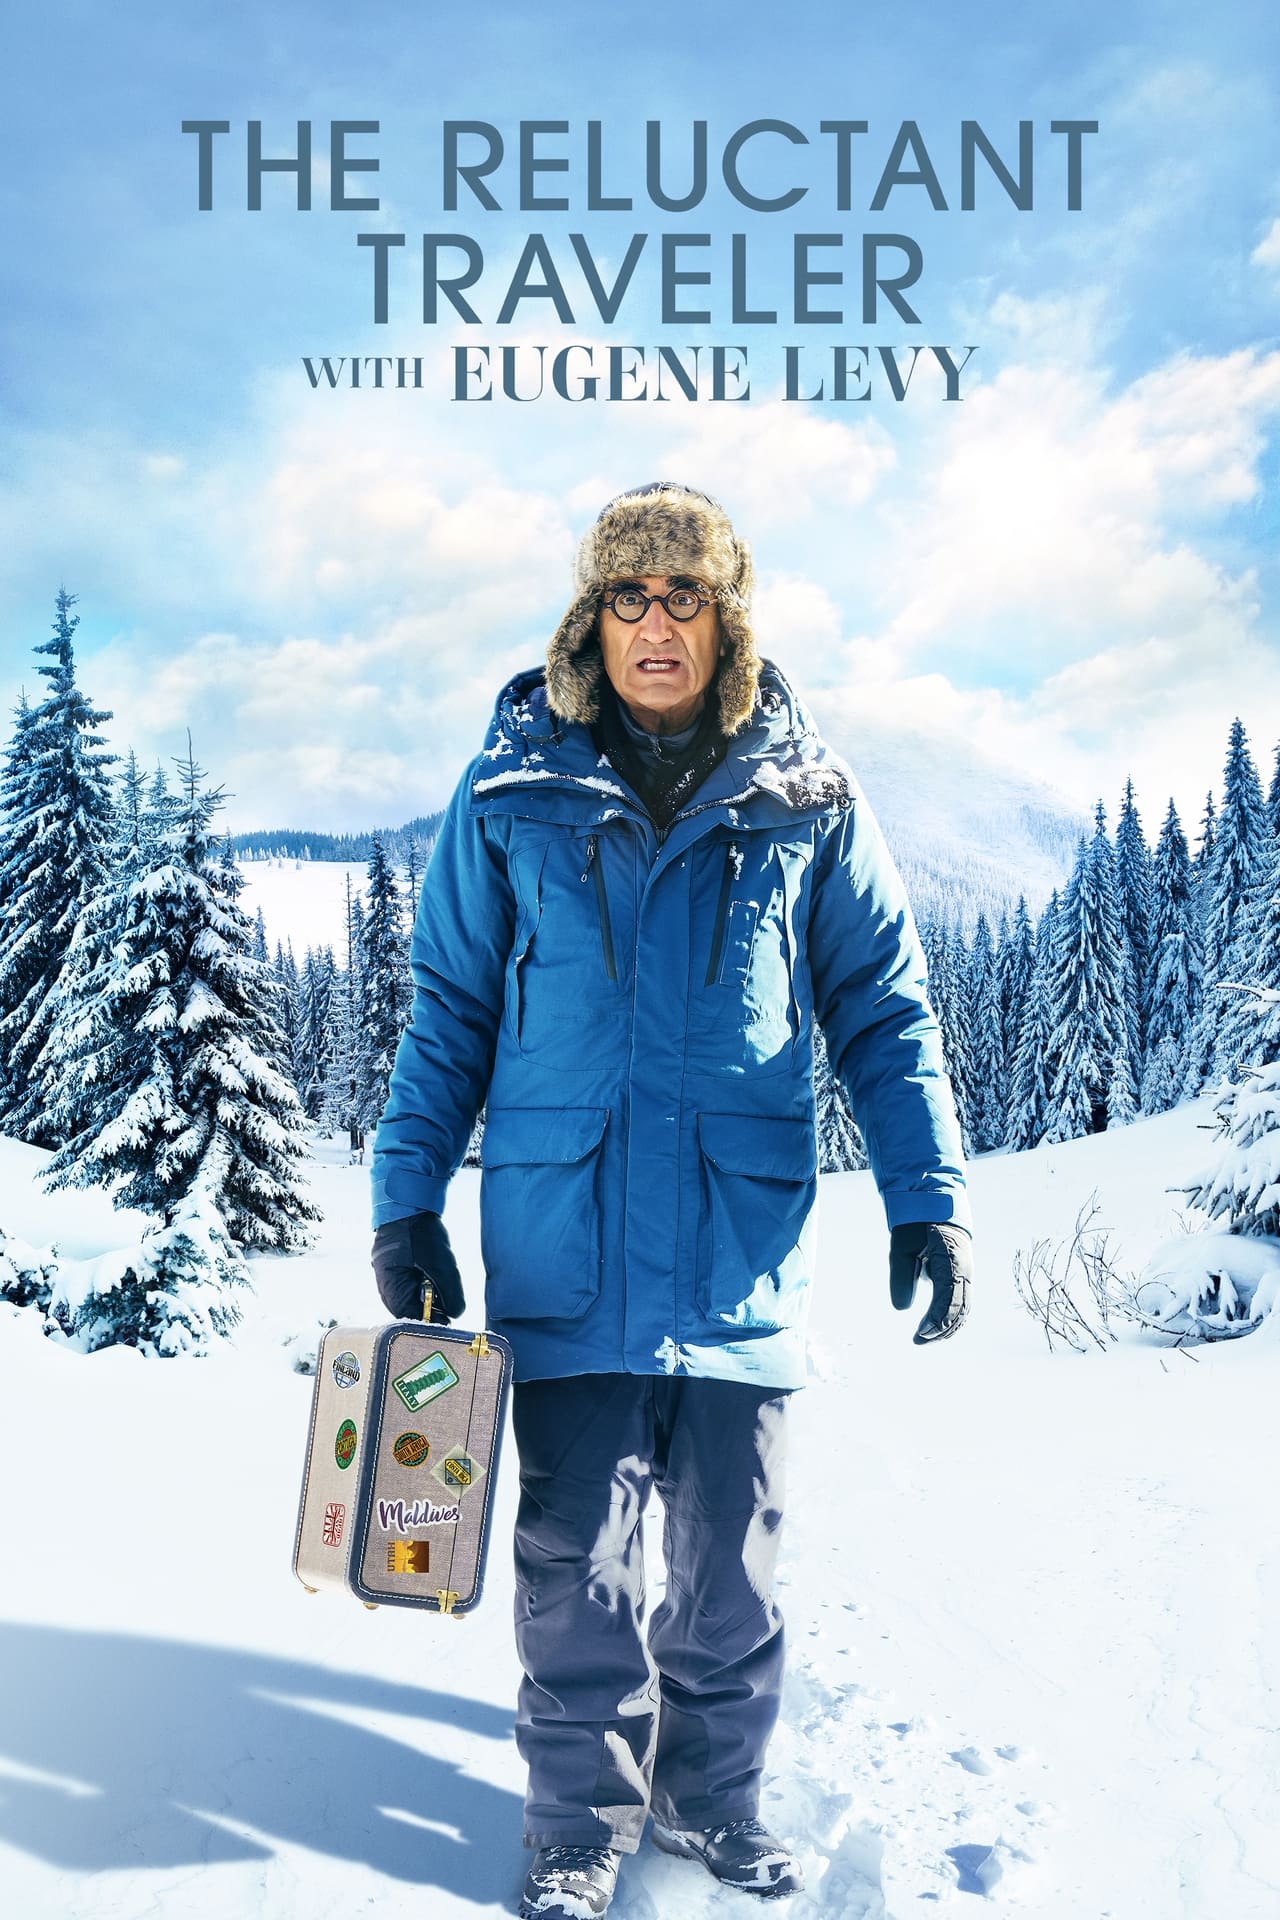 Image The Reluctant Traveler with Eugene Levy